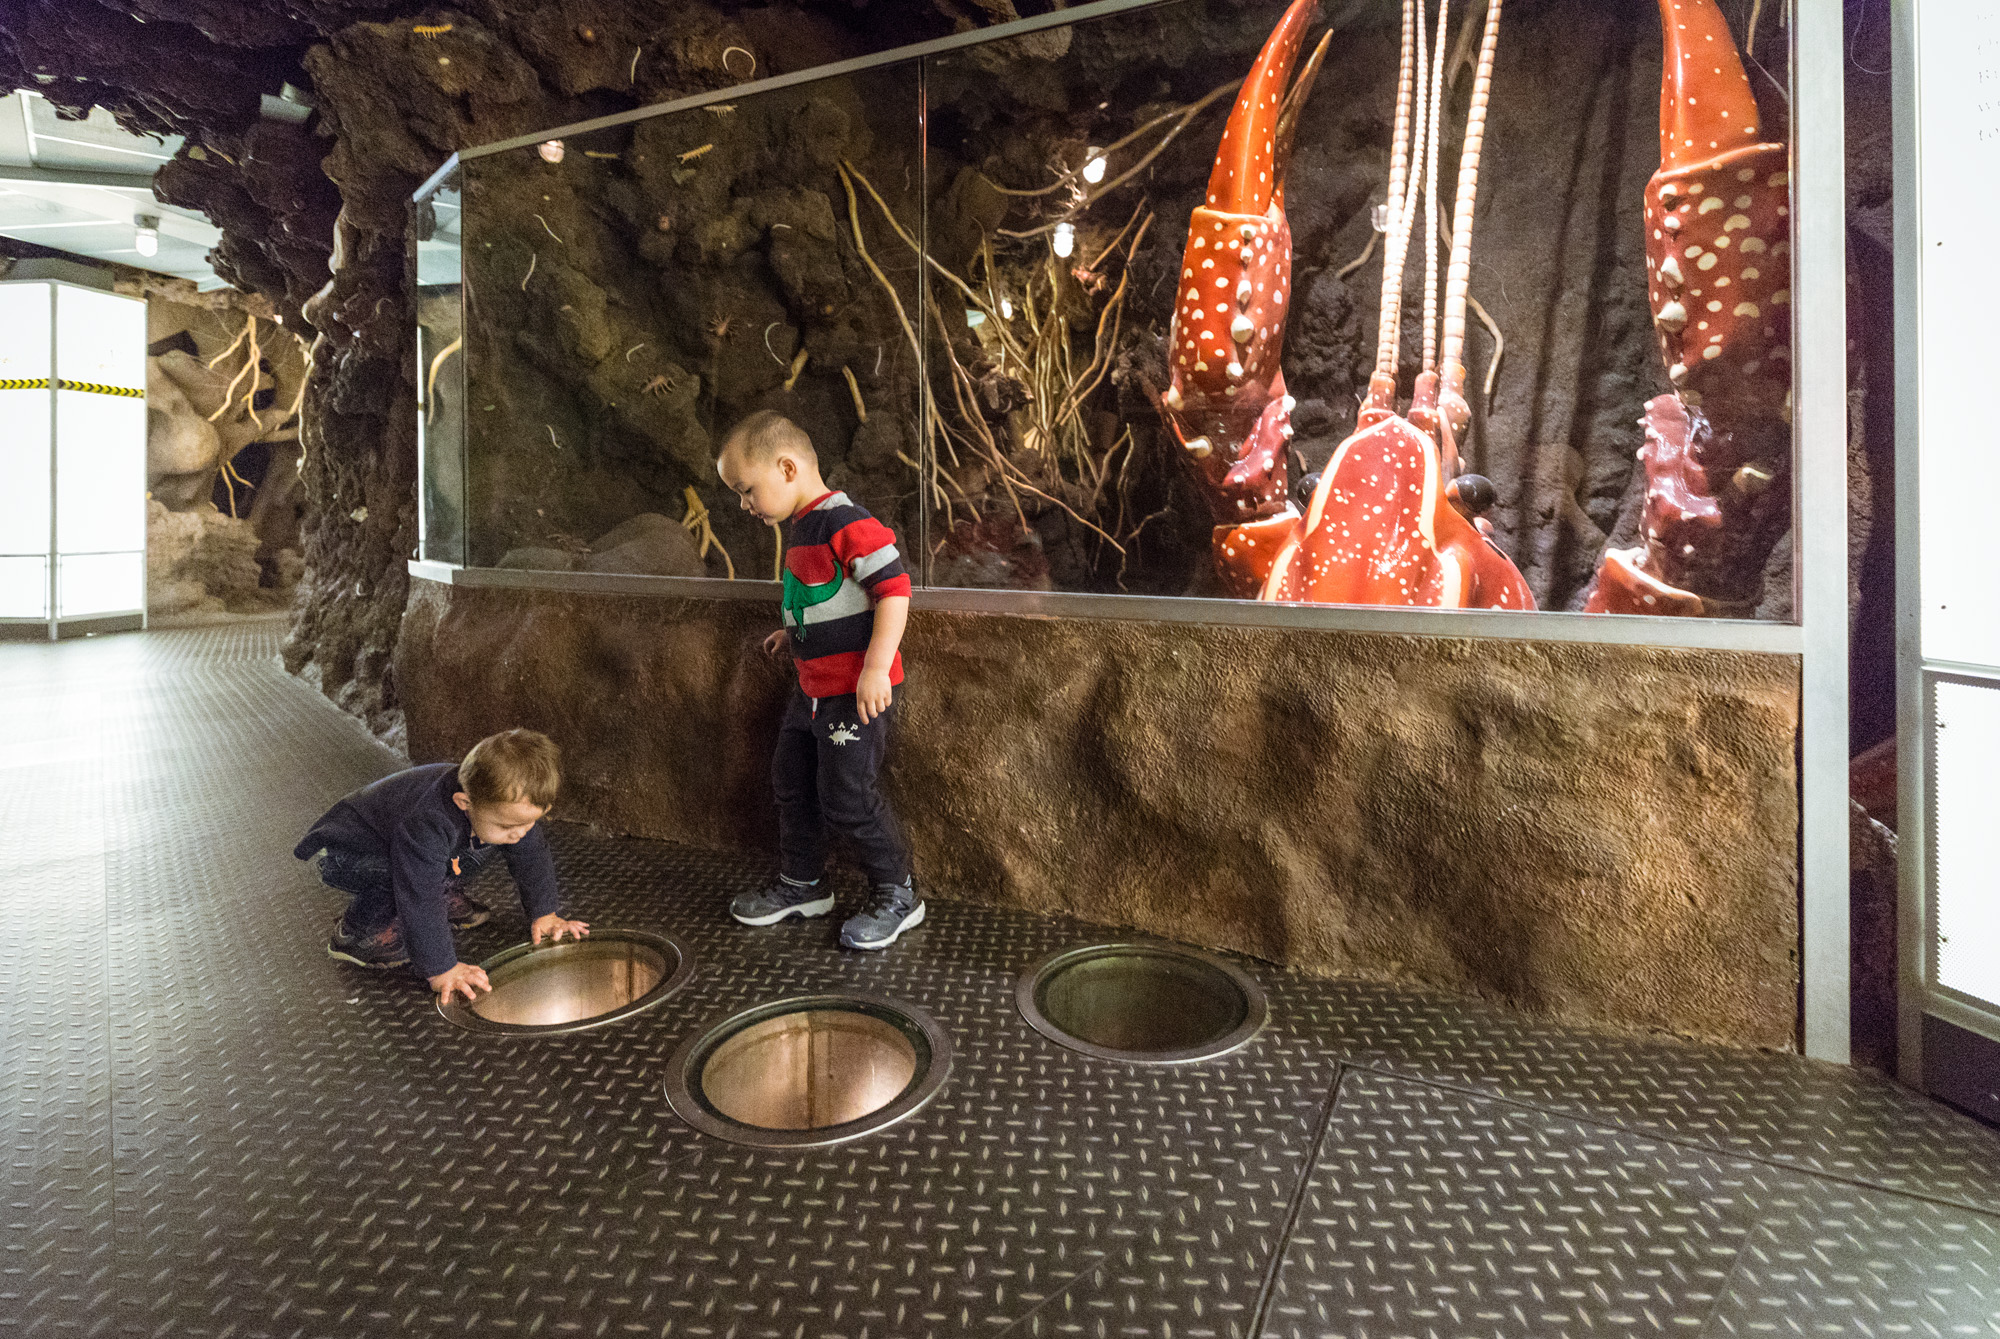 Two boys stand in front of a reproduction of a crayfish more than twice their size. The boy to the left crouches, looking down into a window cut in floor. Recreated soil and roots are visible behind them.